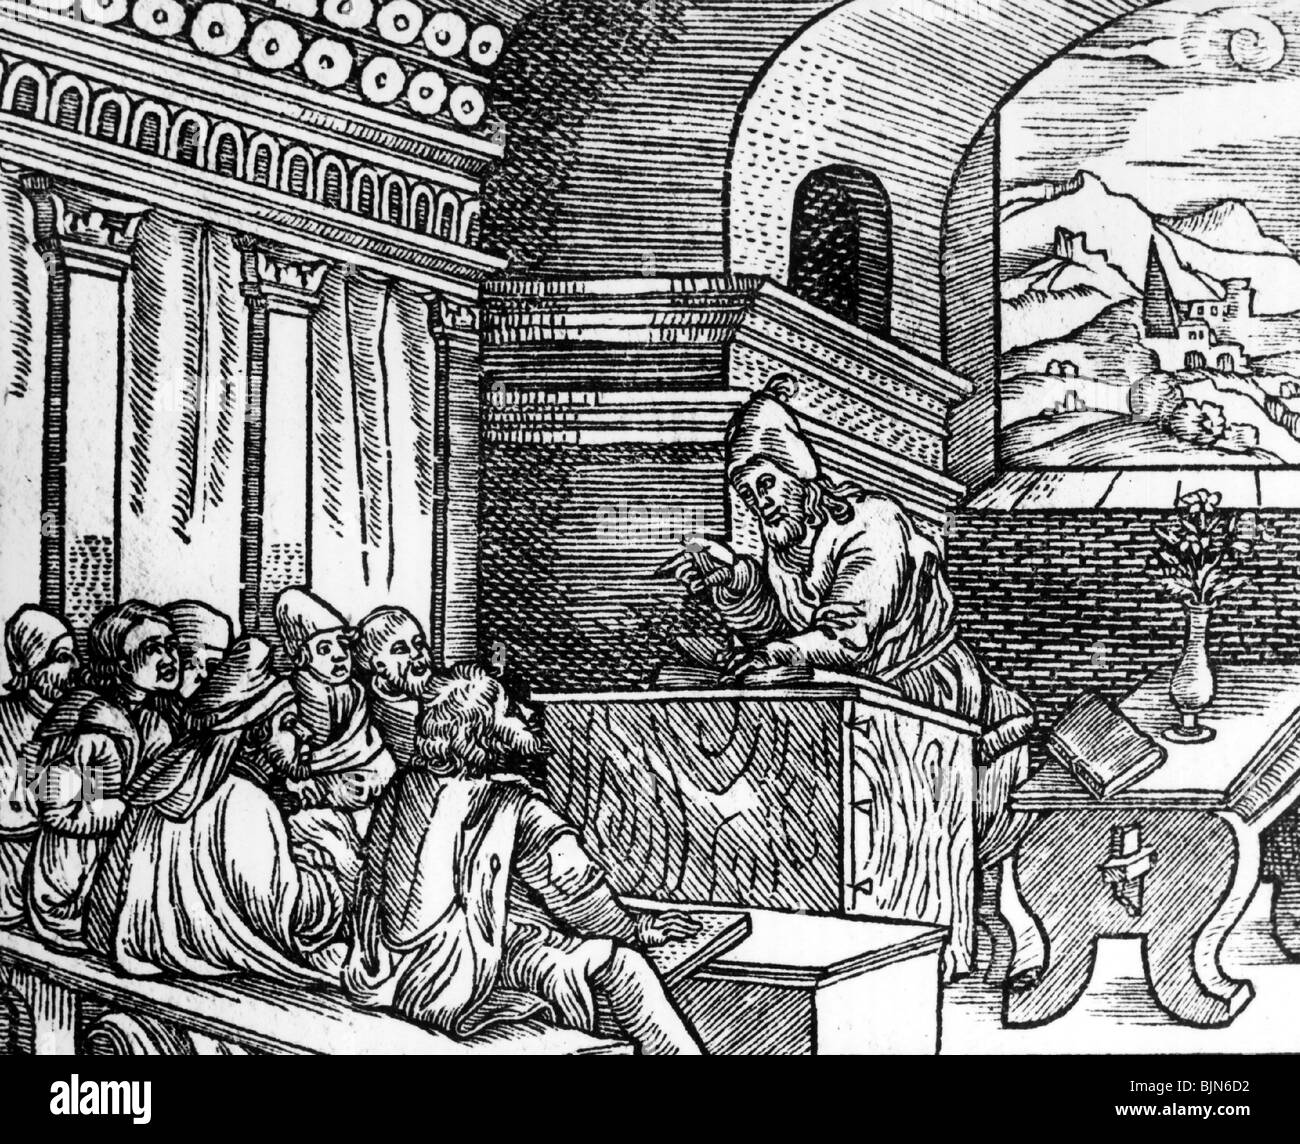 education, school, 'The Lesson', teacher at a university giving a lecture, woodcut from 'Zwierciadlo' (Mirror), by Mikolaj Rej, Poland, 1568, Stock Photo